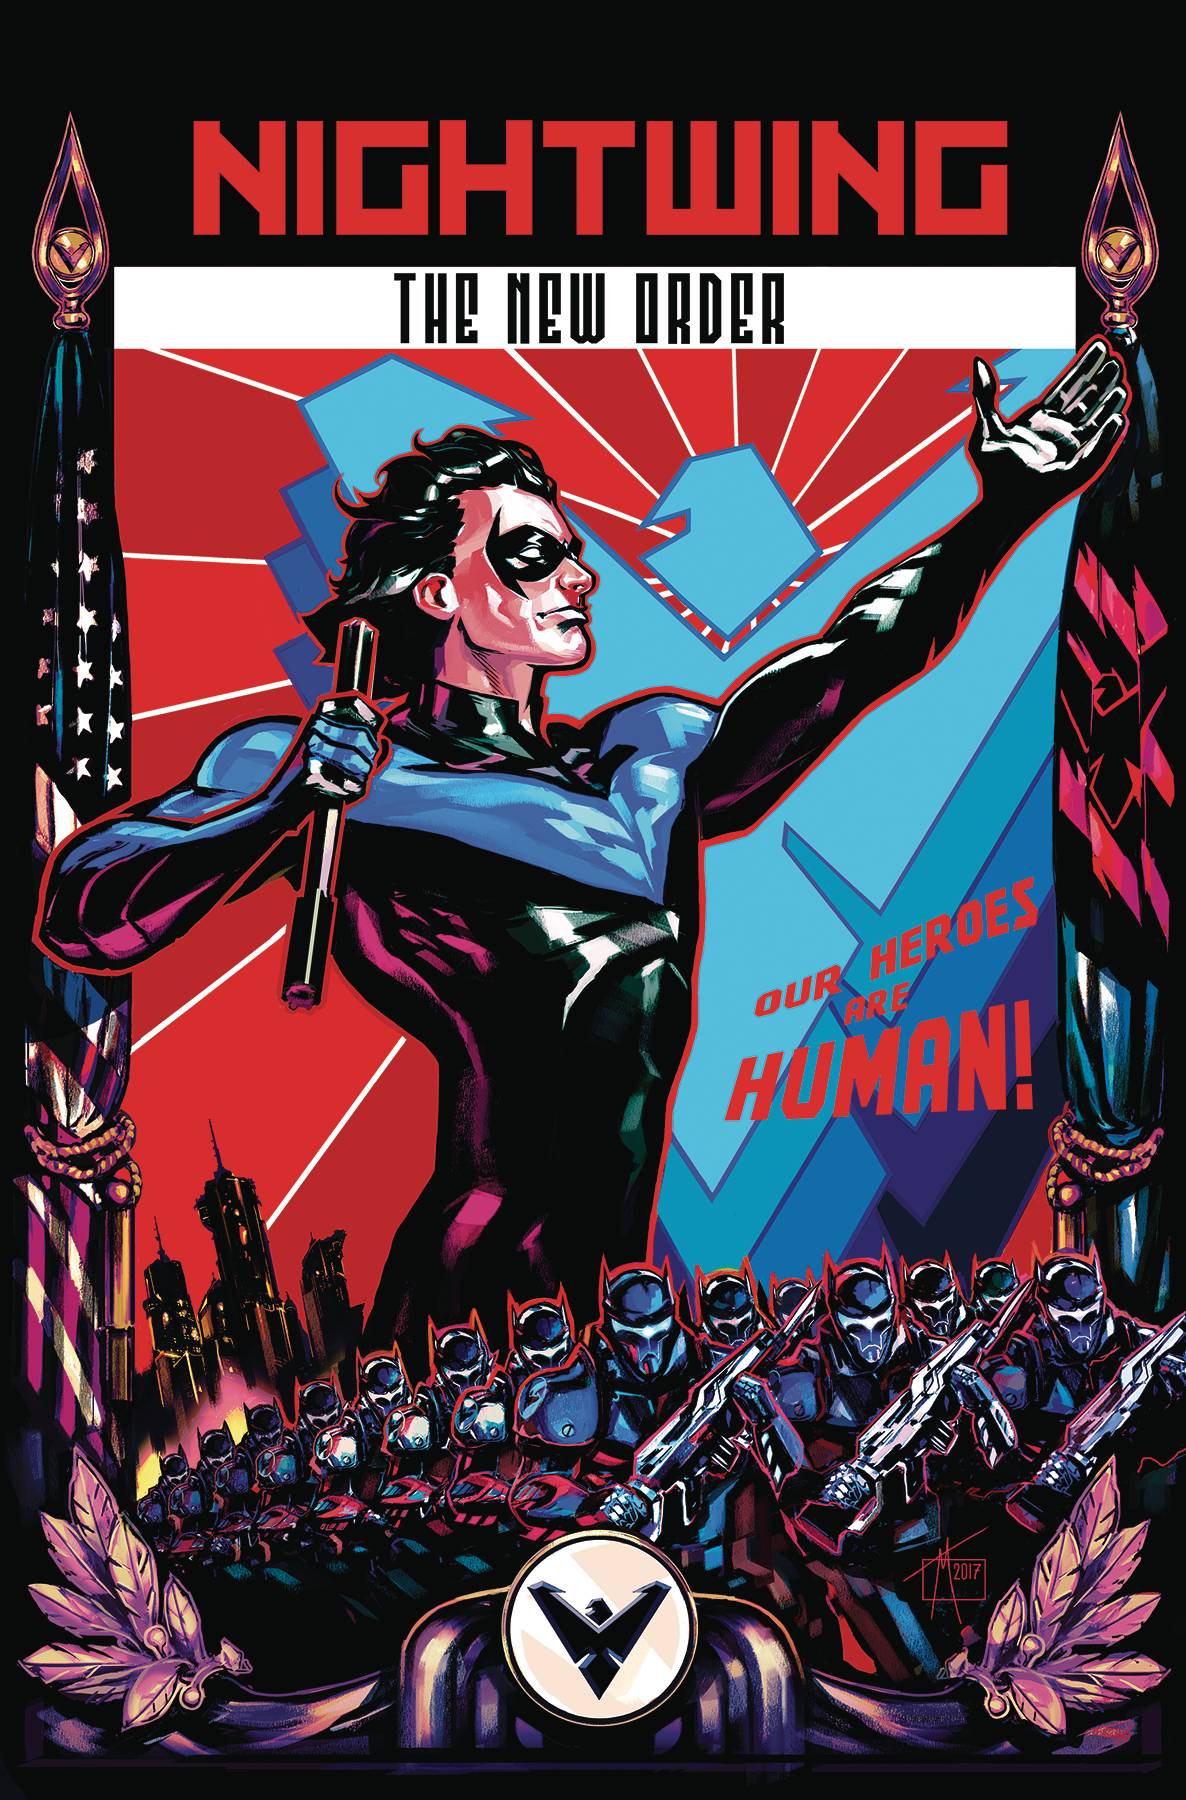 NIGHTWING: THE NEW ORDER#1